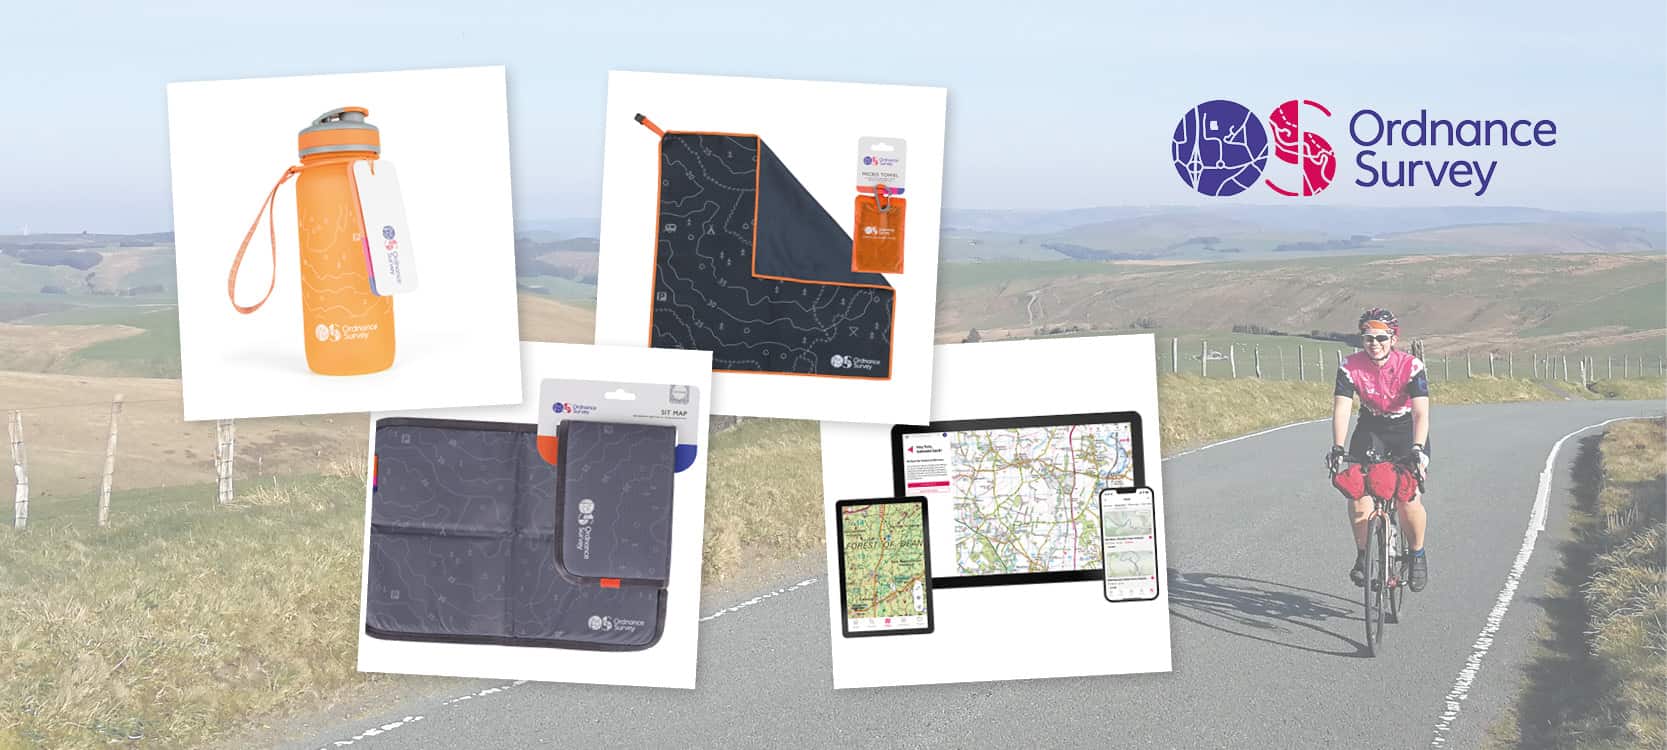 12th prize Ordnance Survey bike accessories bundle (water bottle/sit map/micro towel/12 months access to OS Maps Premium) worth £75